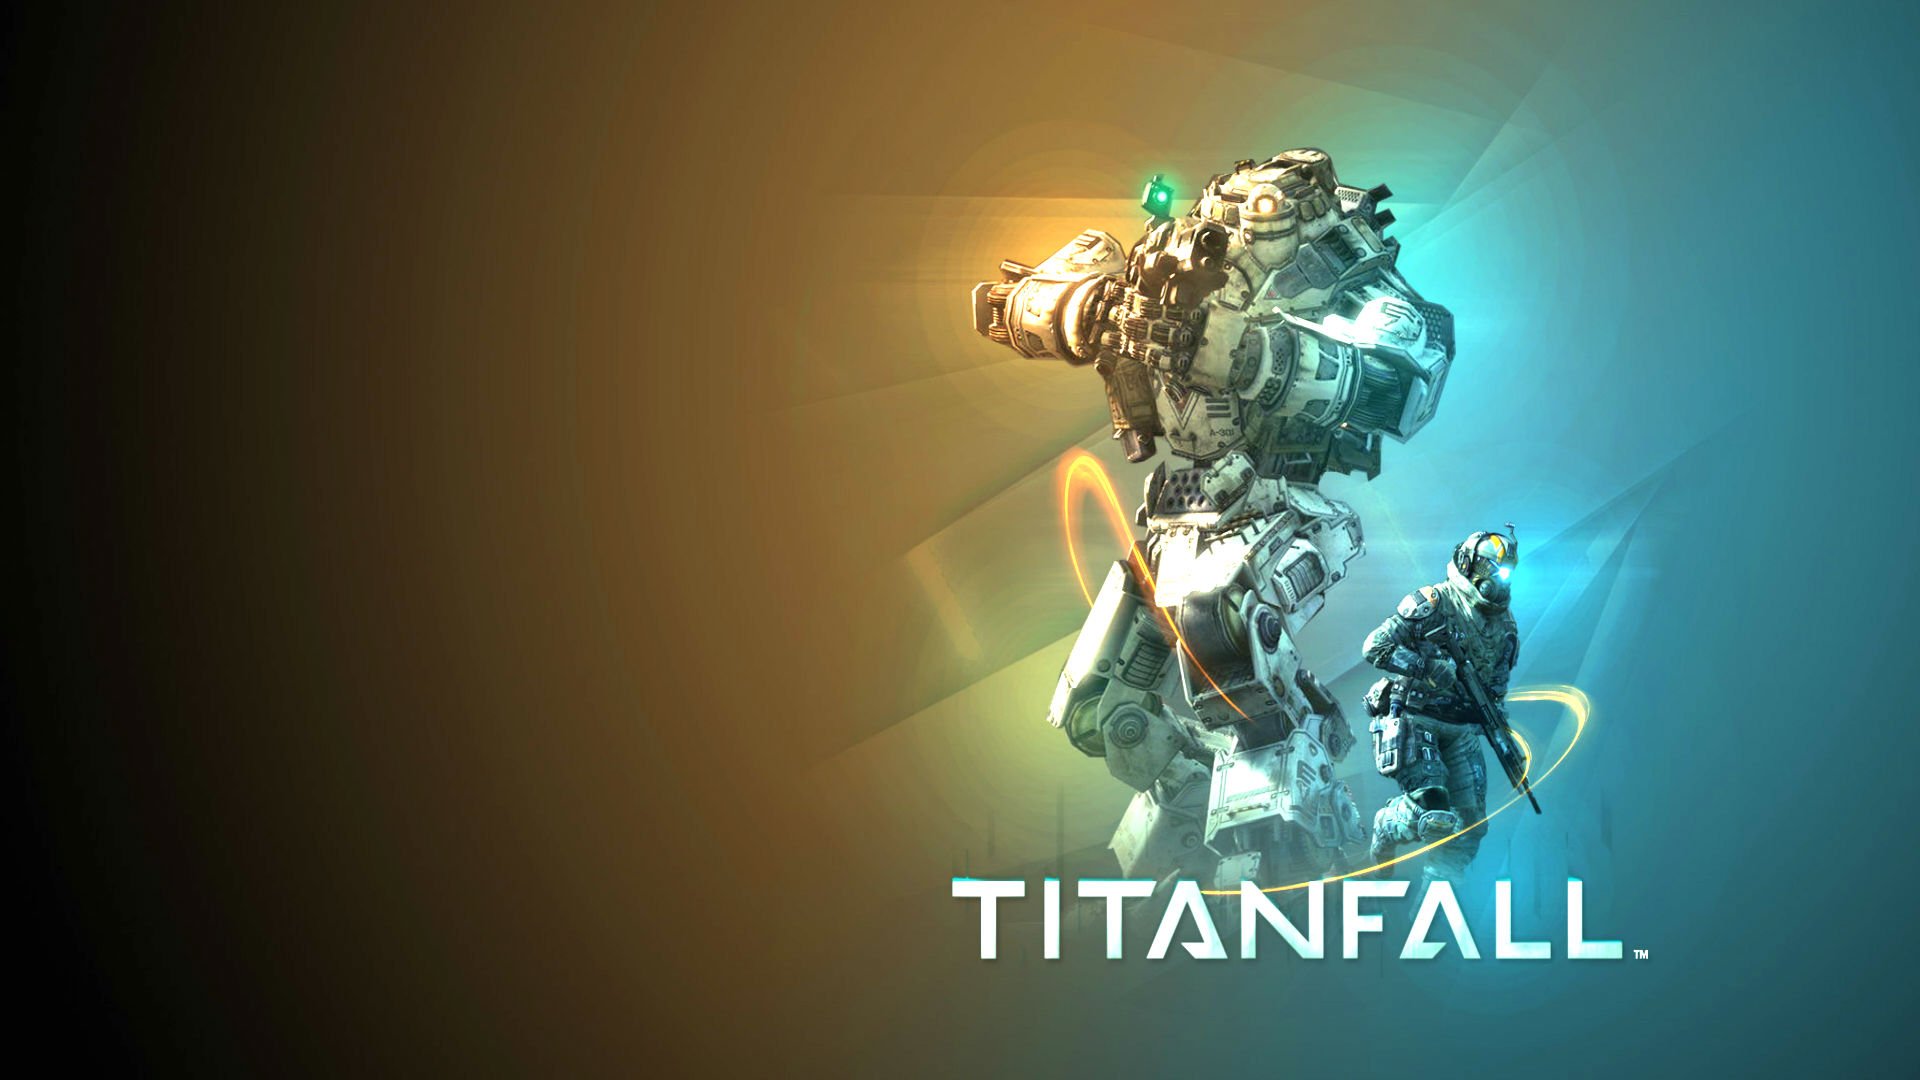 titanfall, Shooter, Fps, Action, Futuristic, Online, Mmo, 1titanfall, Fighting, Apocalyptic, Warrior, Weapon, Gun, Mecha, Mech Wallpaper